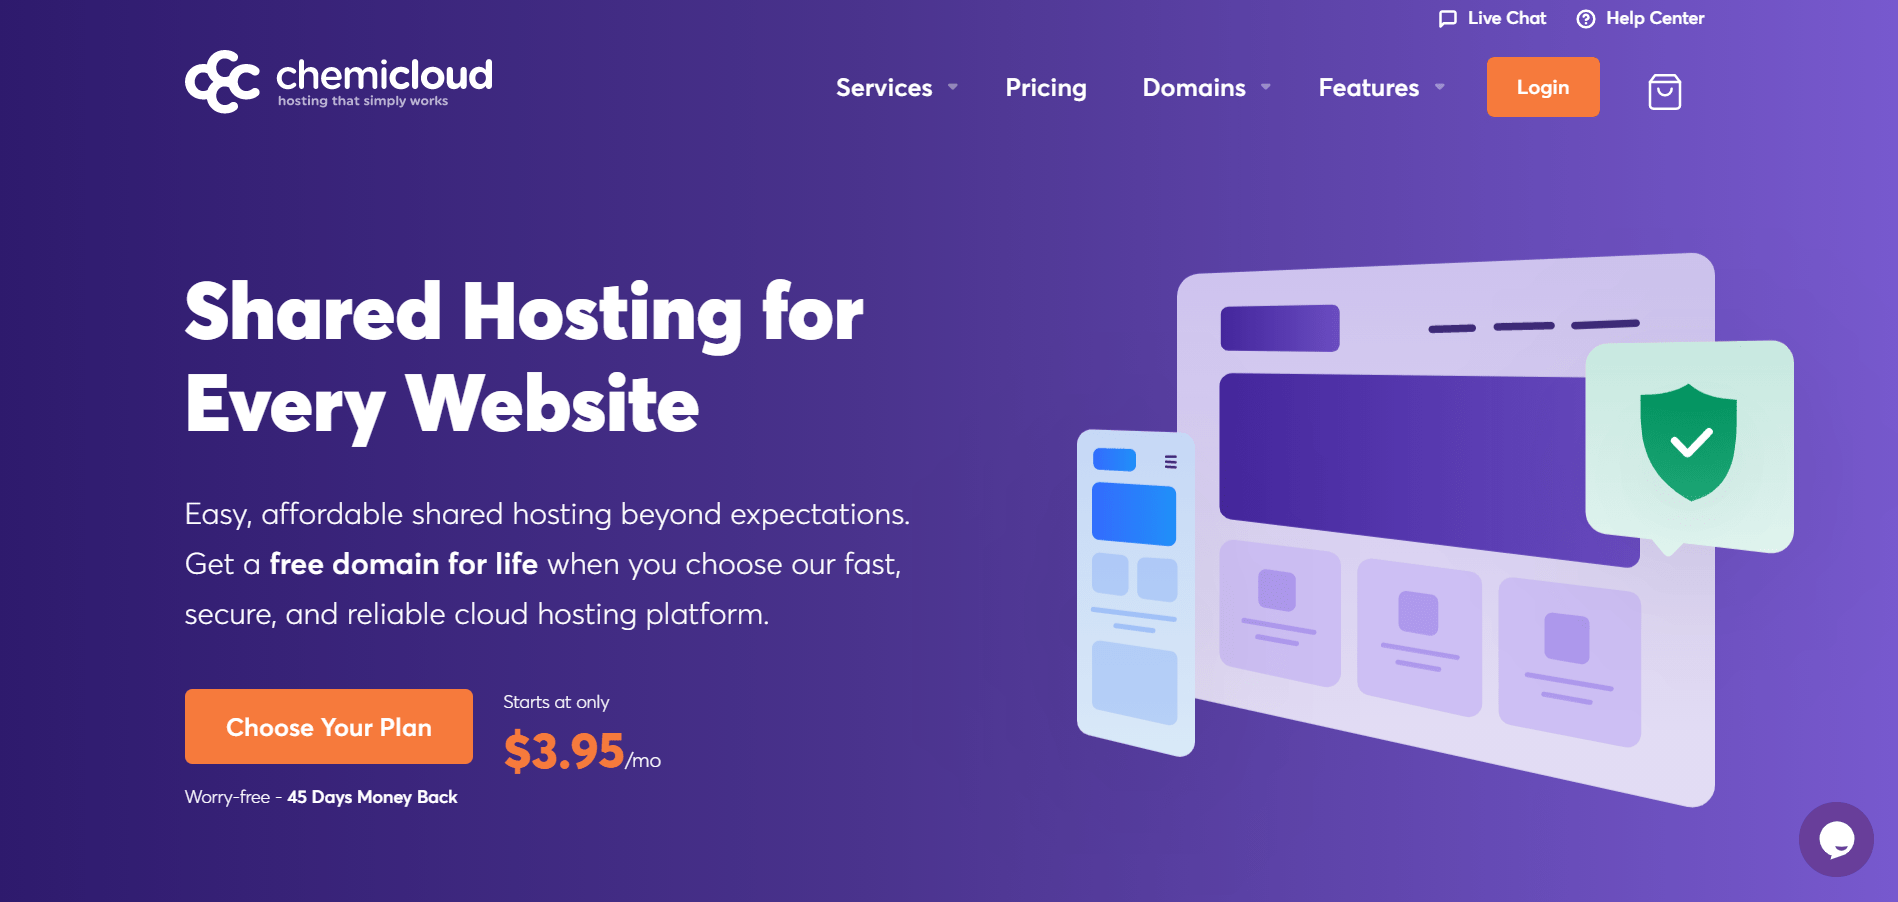 Chemicloud shared hosting review